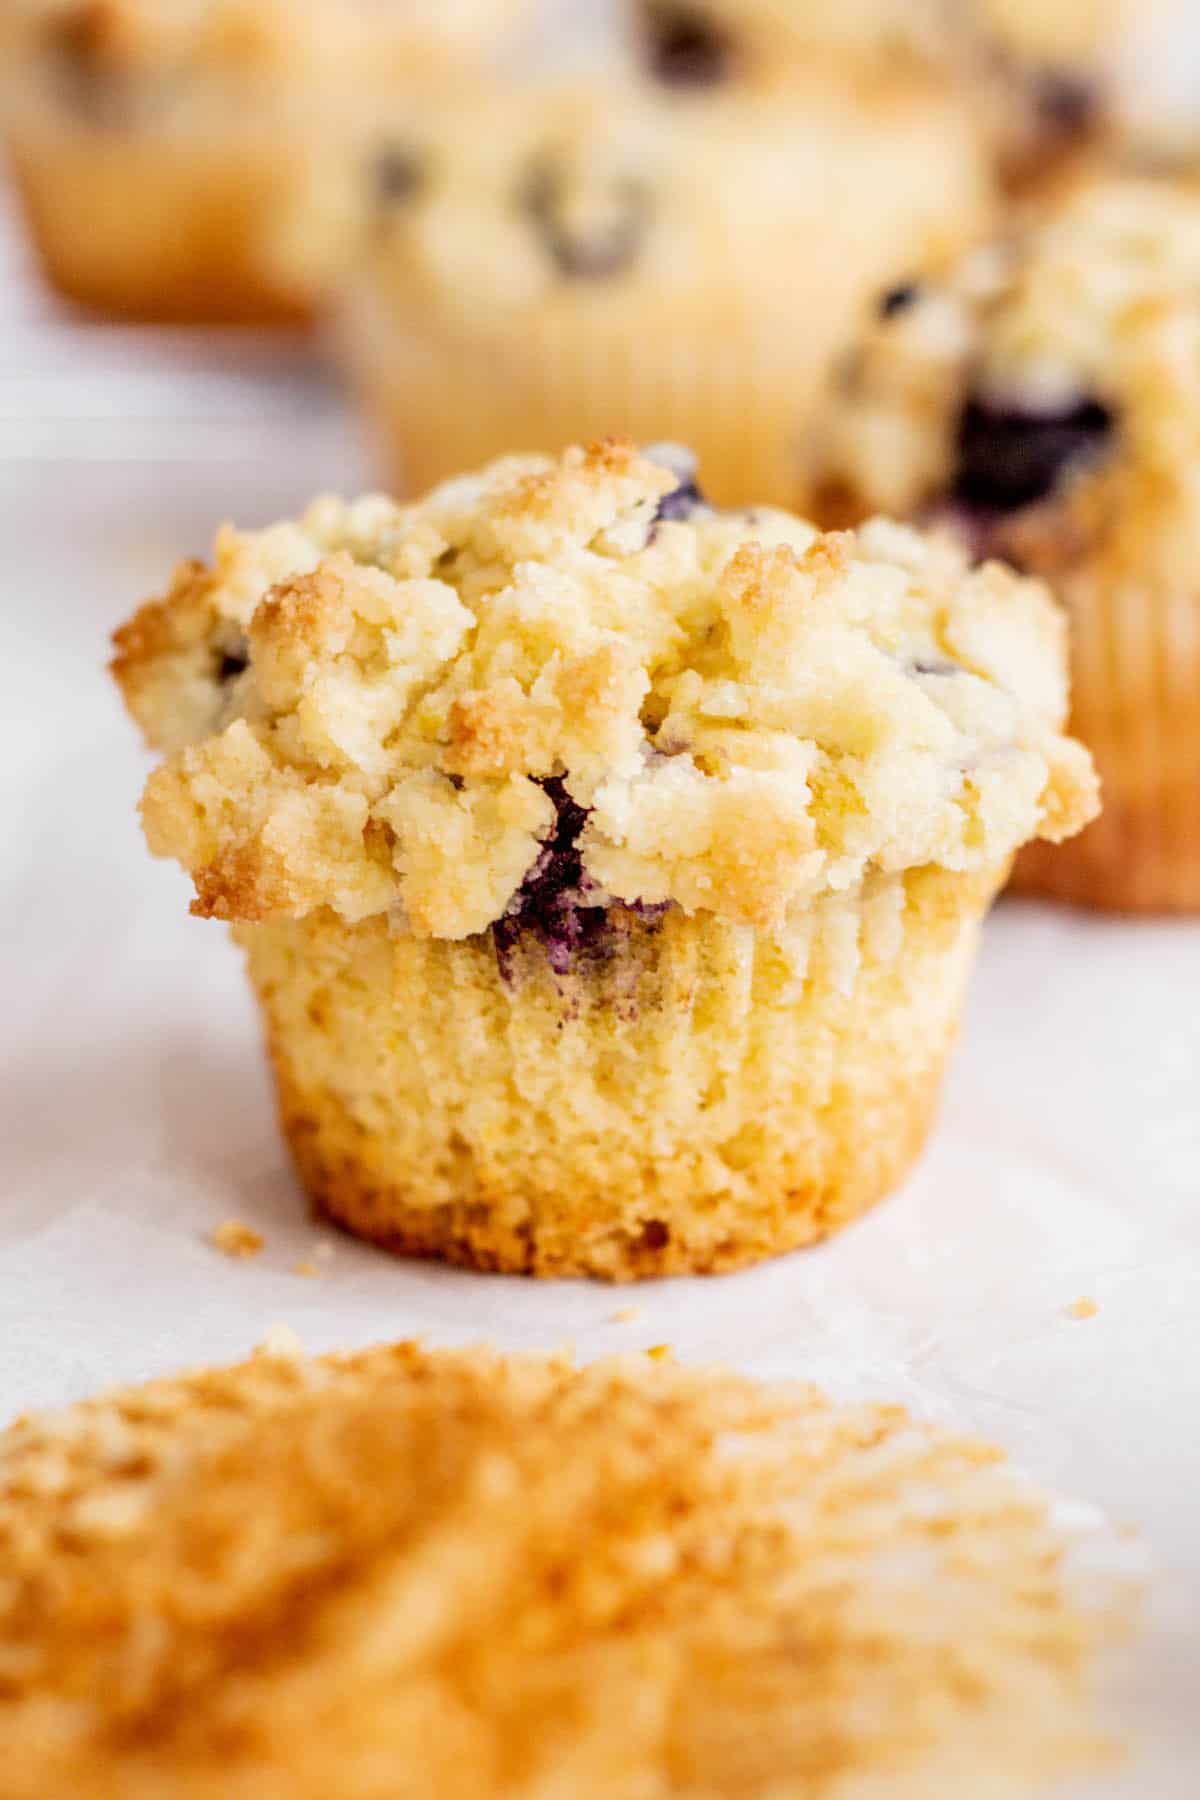 unwrapped muffin with streusel top.